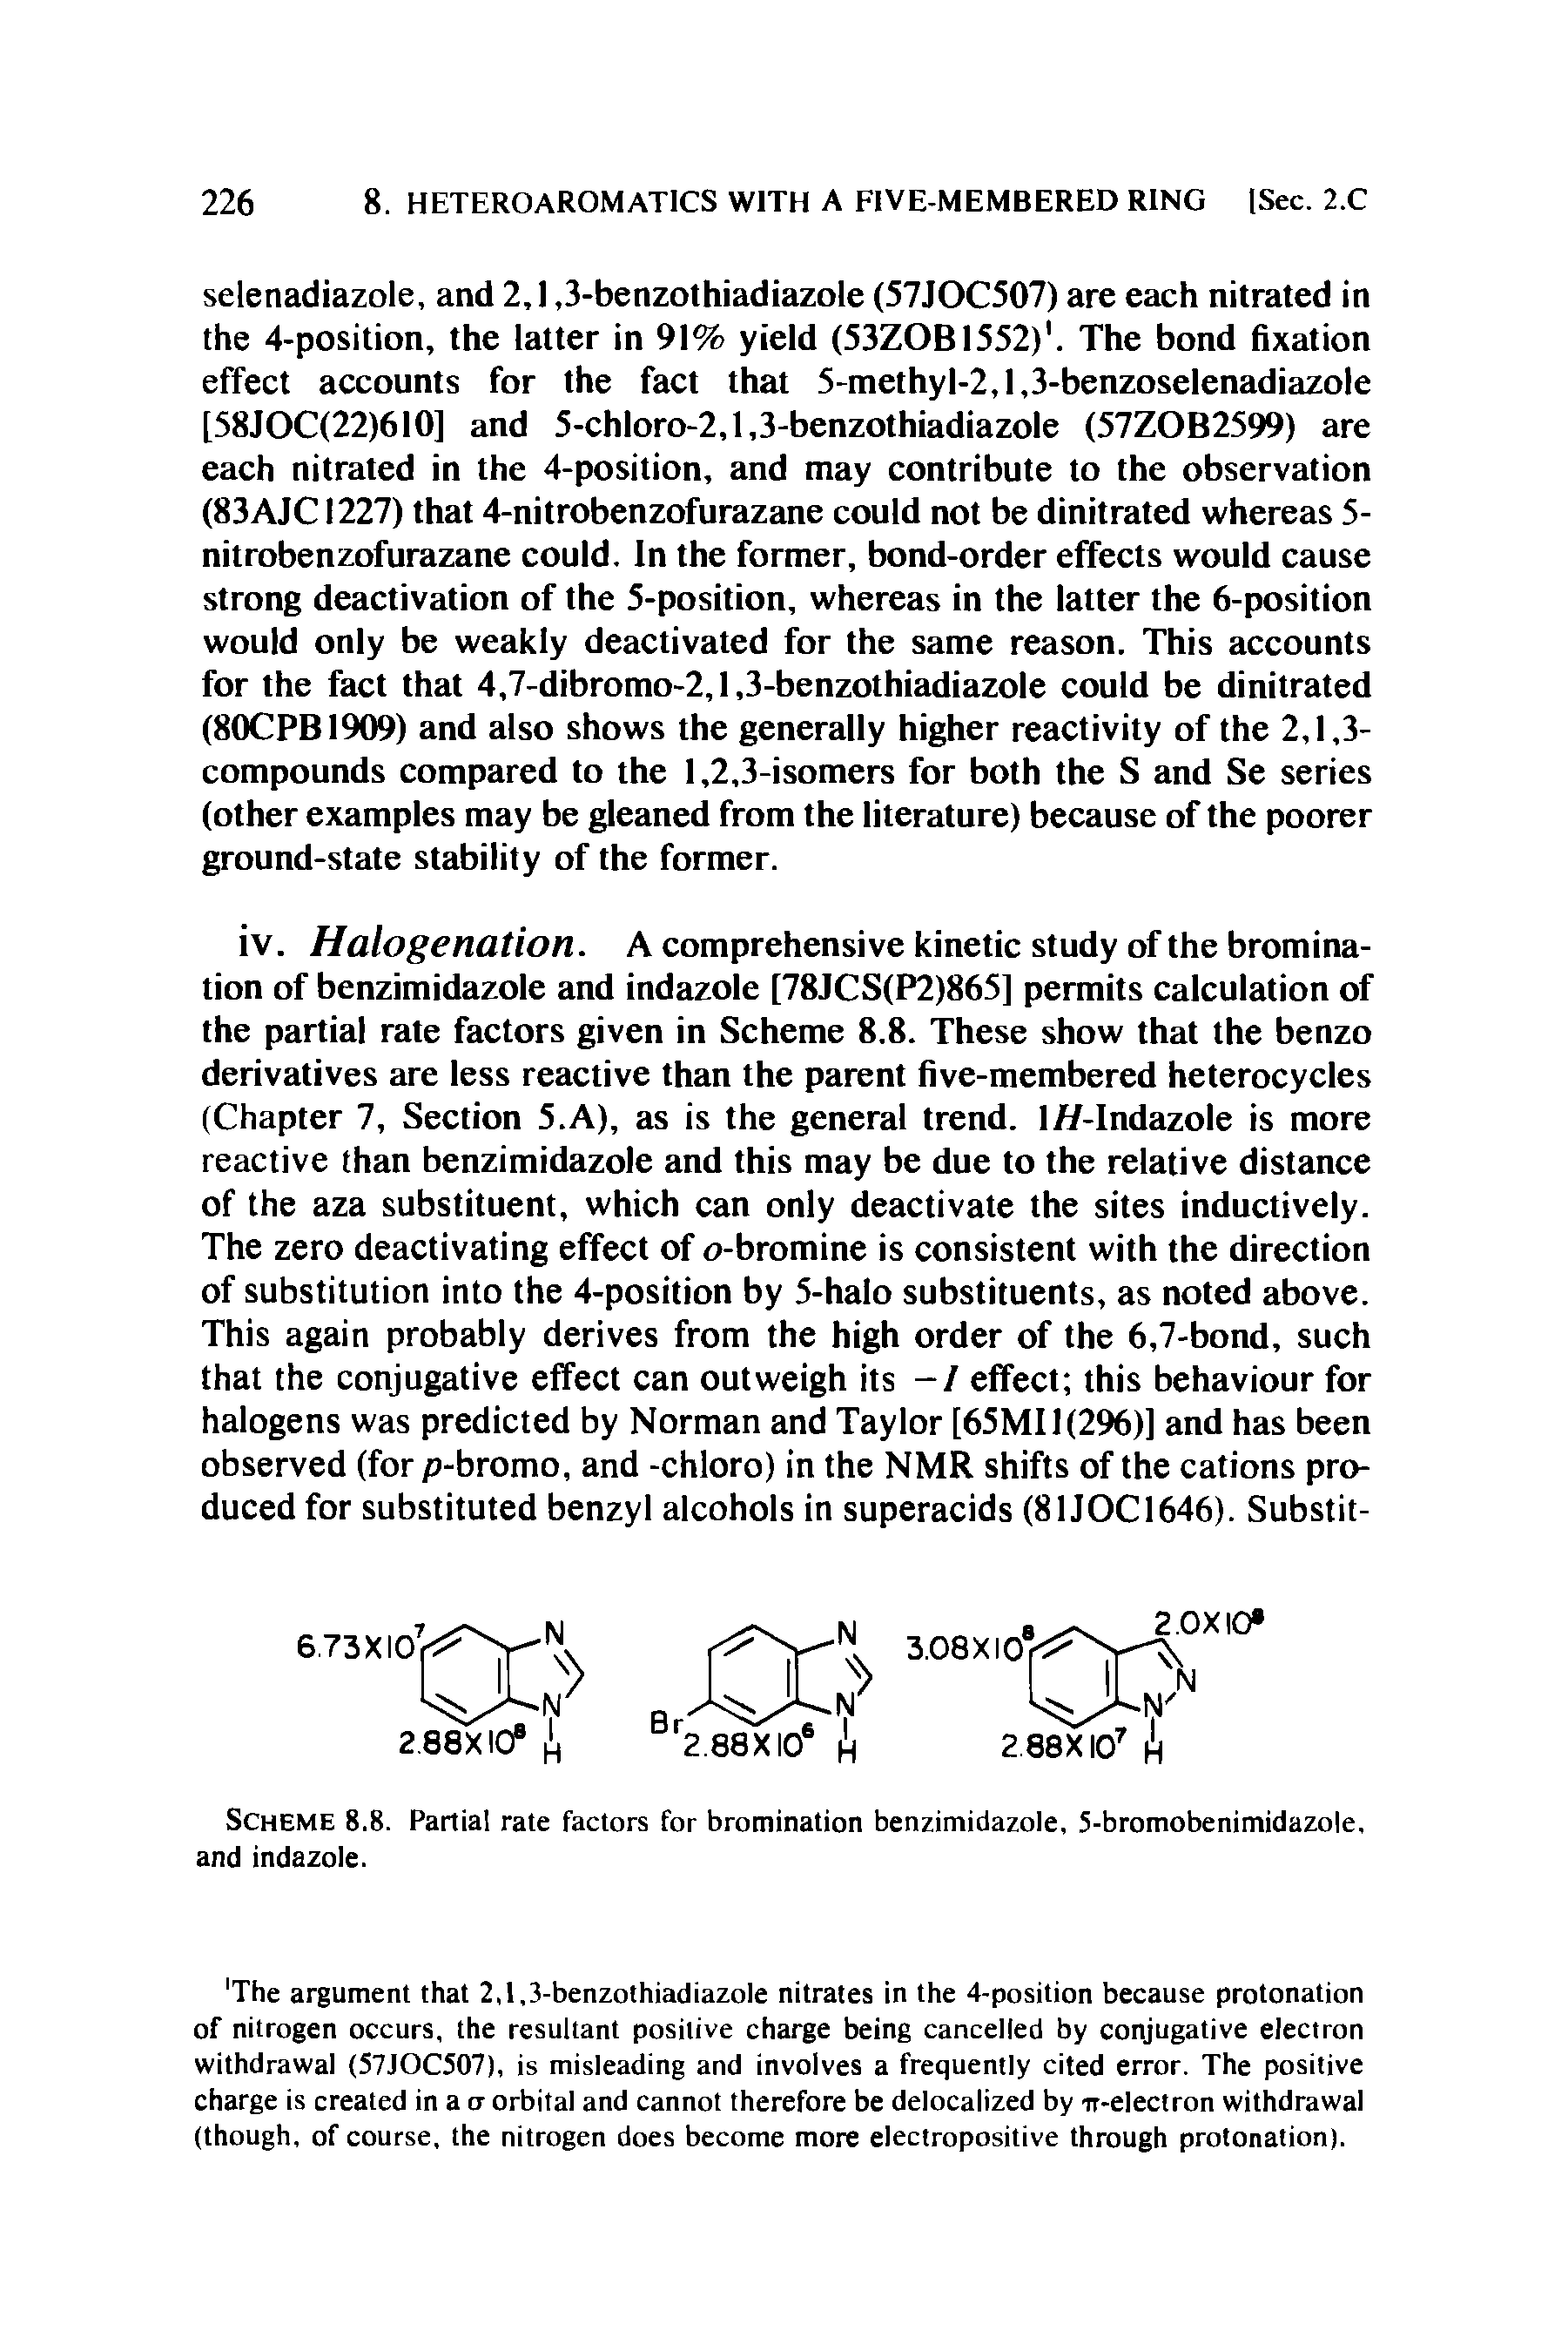 Scheme 8.8. Partial rate factors for bromination benzimidazole, 5-bromobenimidazole, and indazole.